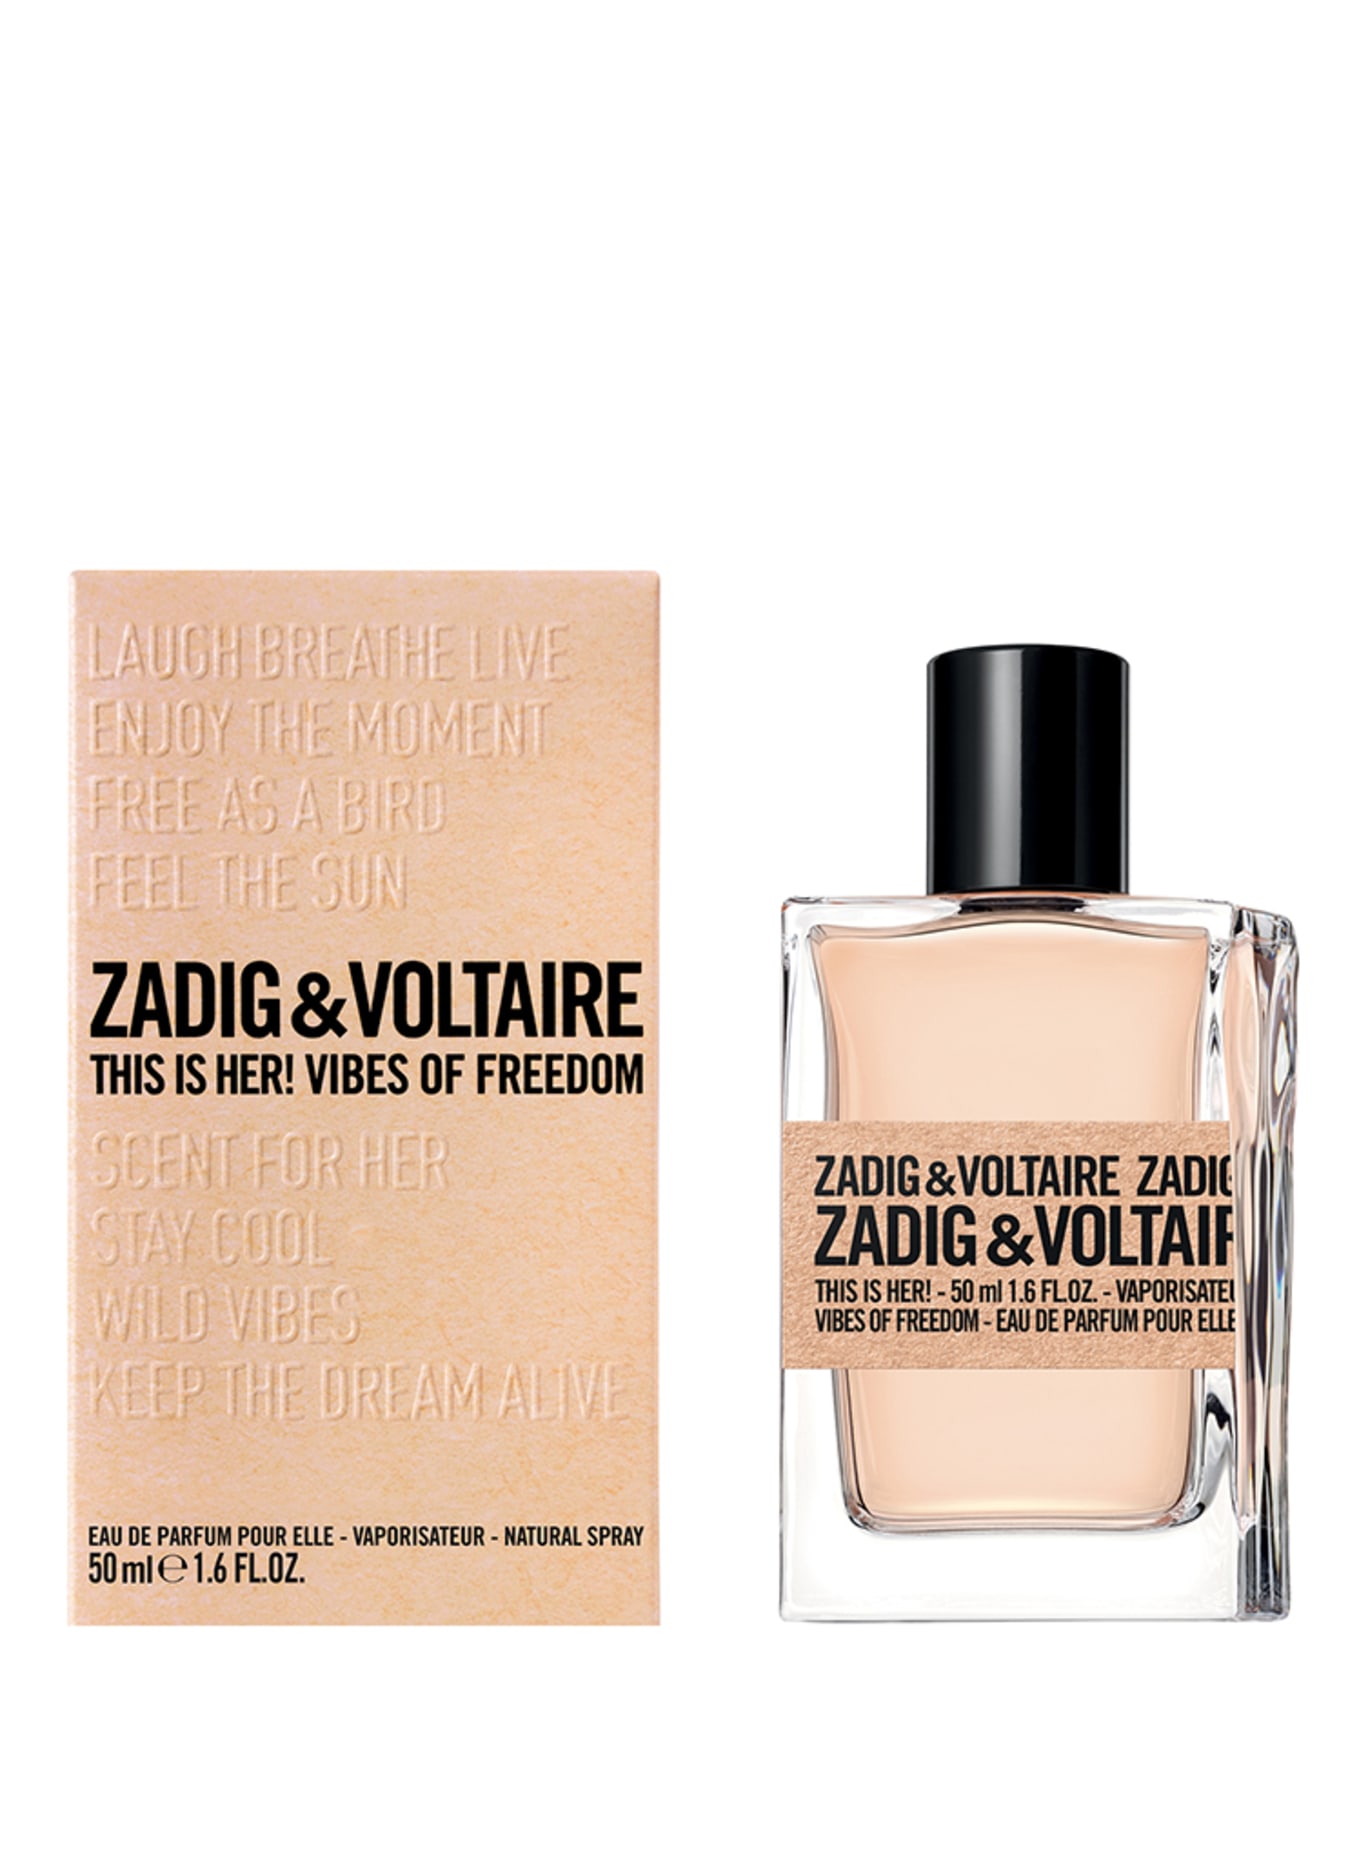 ZADIG & VOLTAIRE Fragrances THIS IS HER! VIBES OF FREEDOM (Obrazek 2)